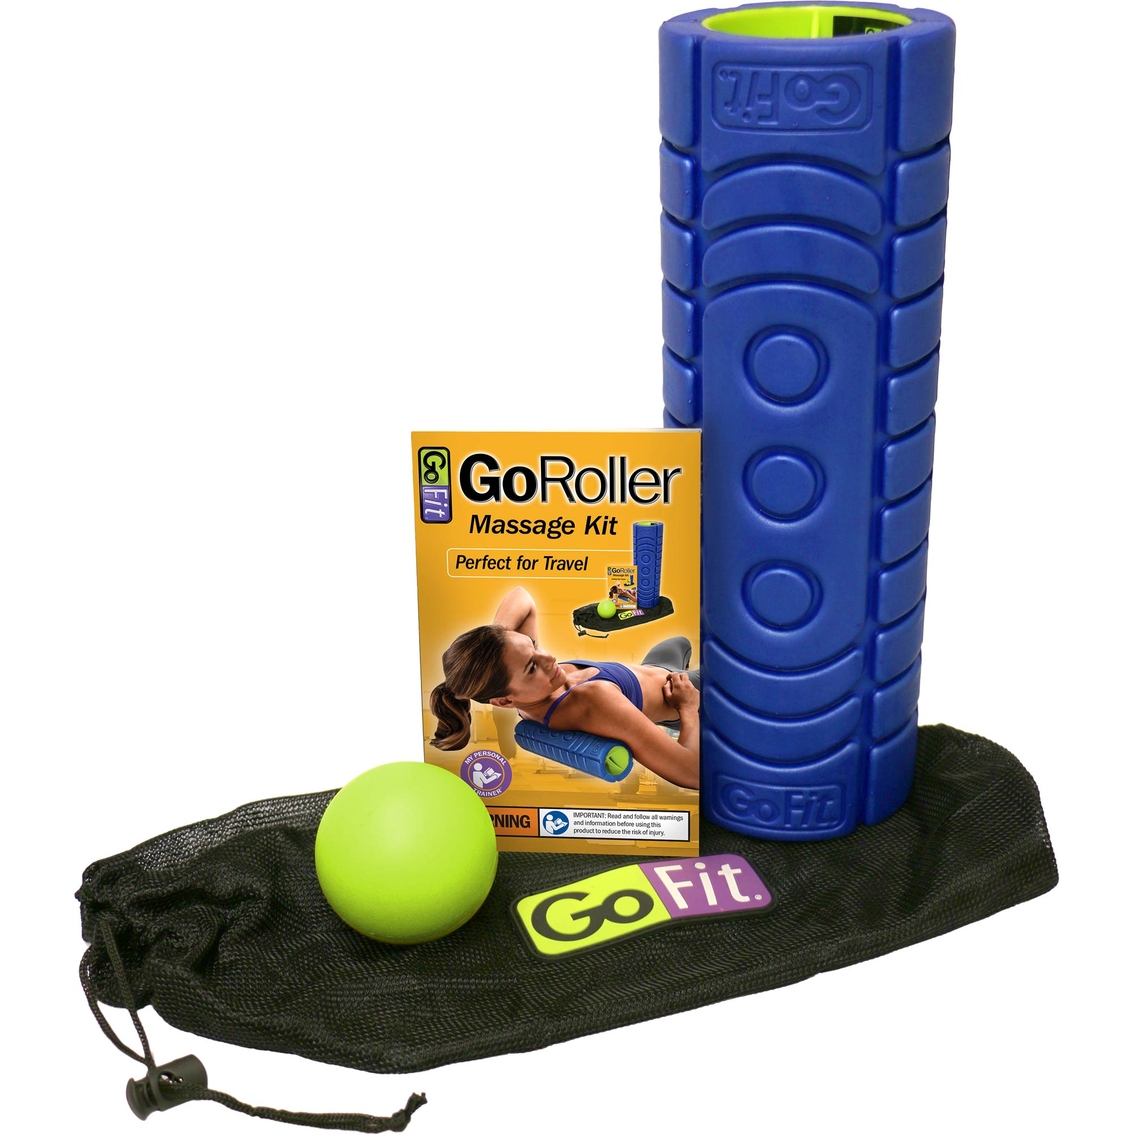 GoFit 18 in. Go Roller - Image 2 of 2